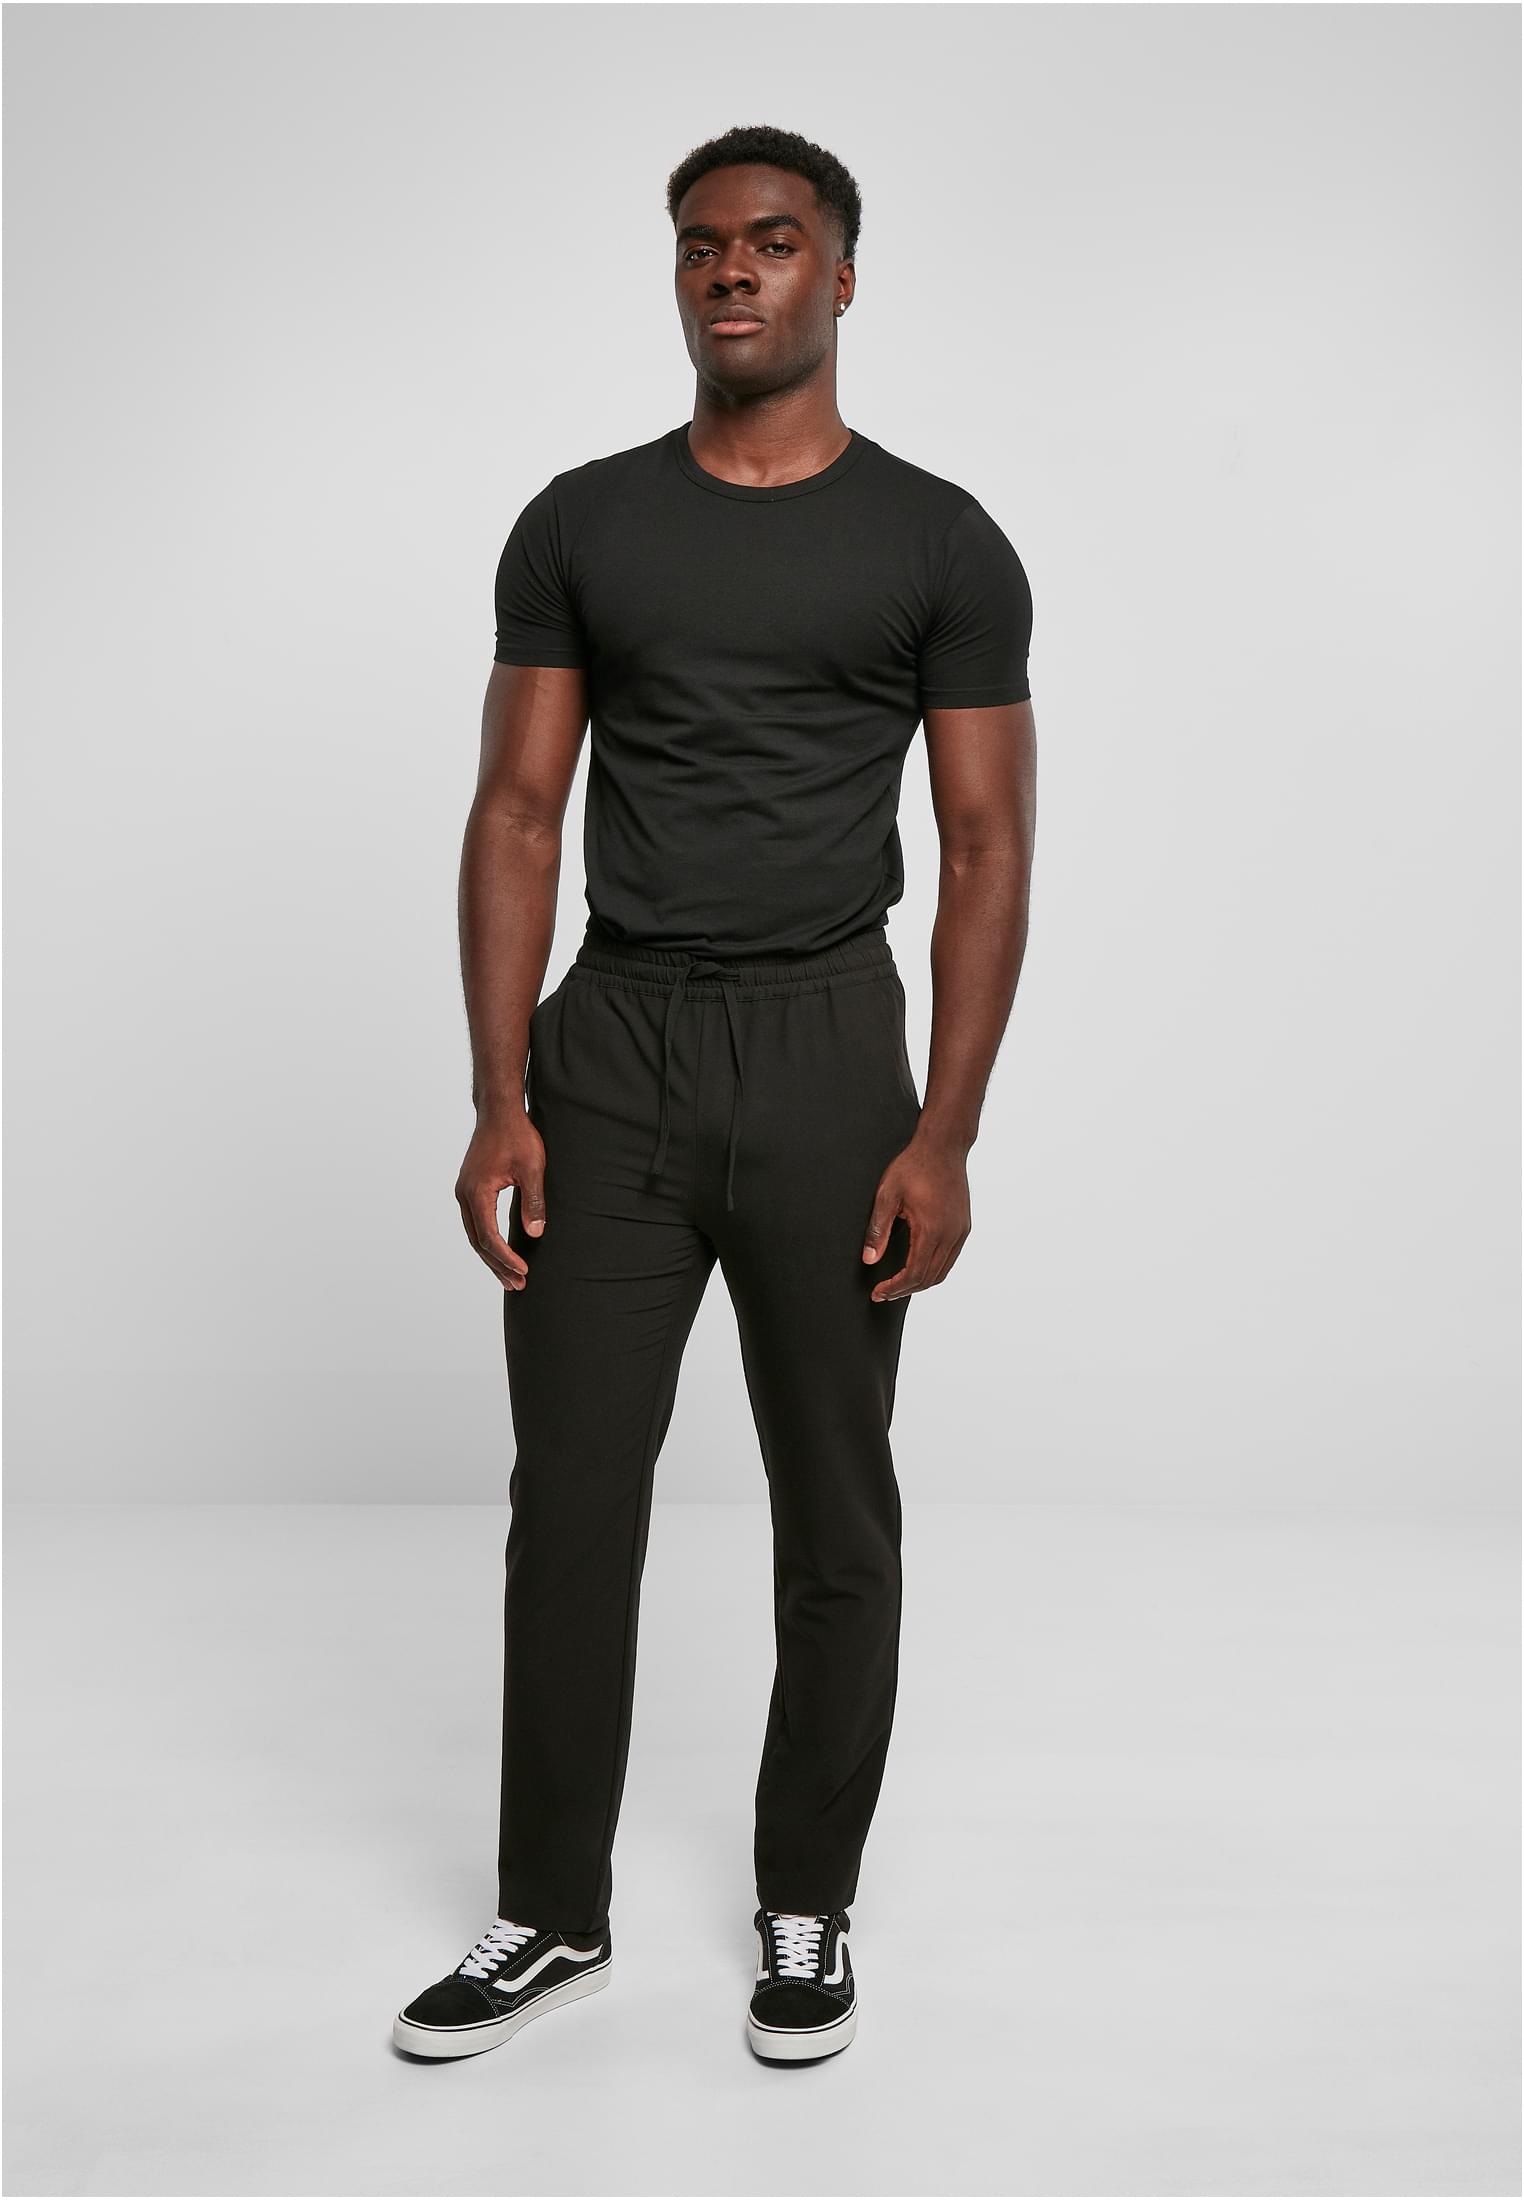 Sweatpants Tapered Jogger Pants in Farbe black